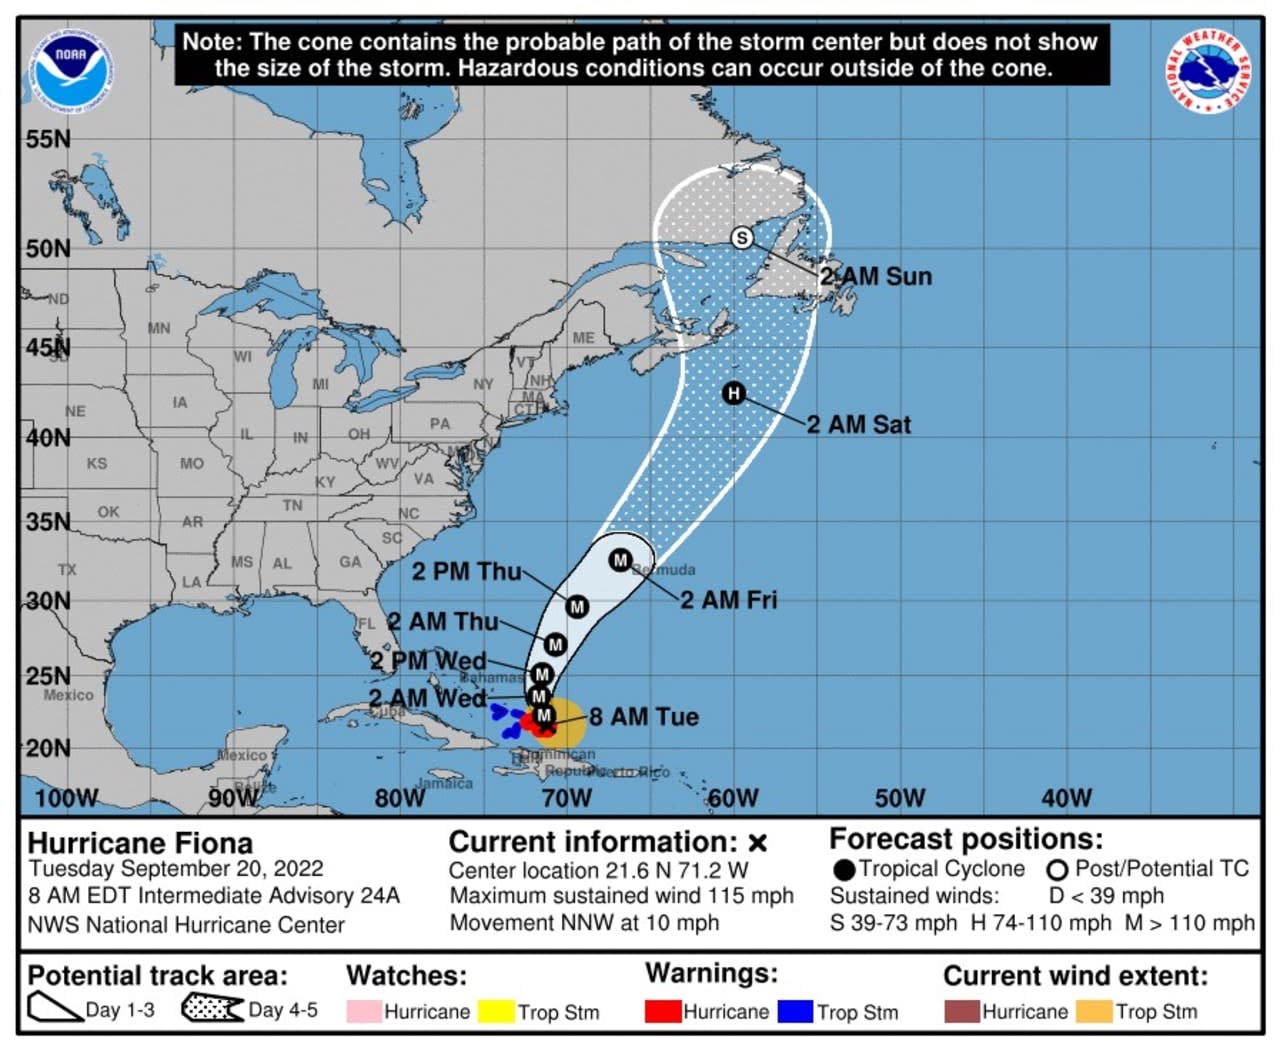 The latest projected timing and track for Hurricane Fiona through Sunday, Sept. 25.